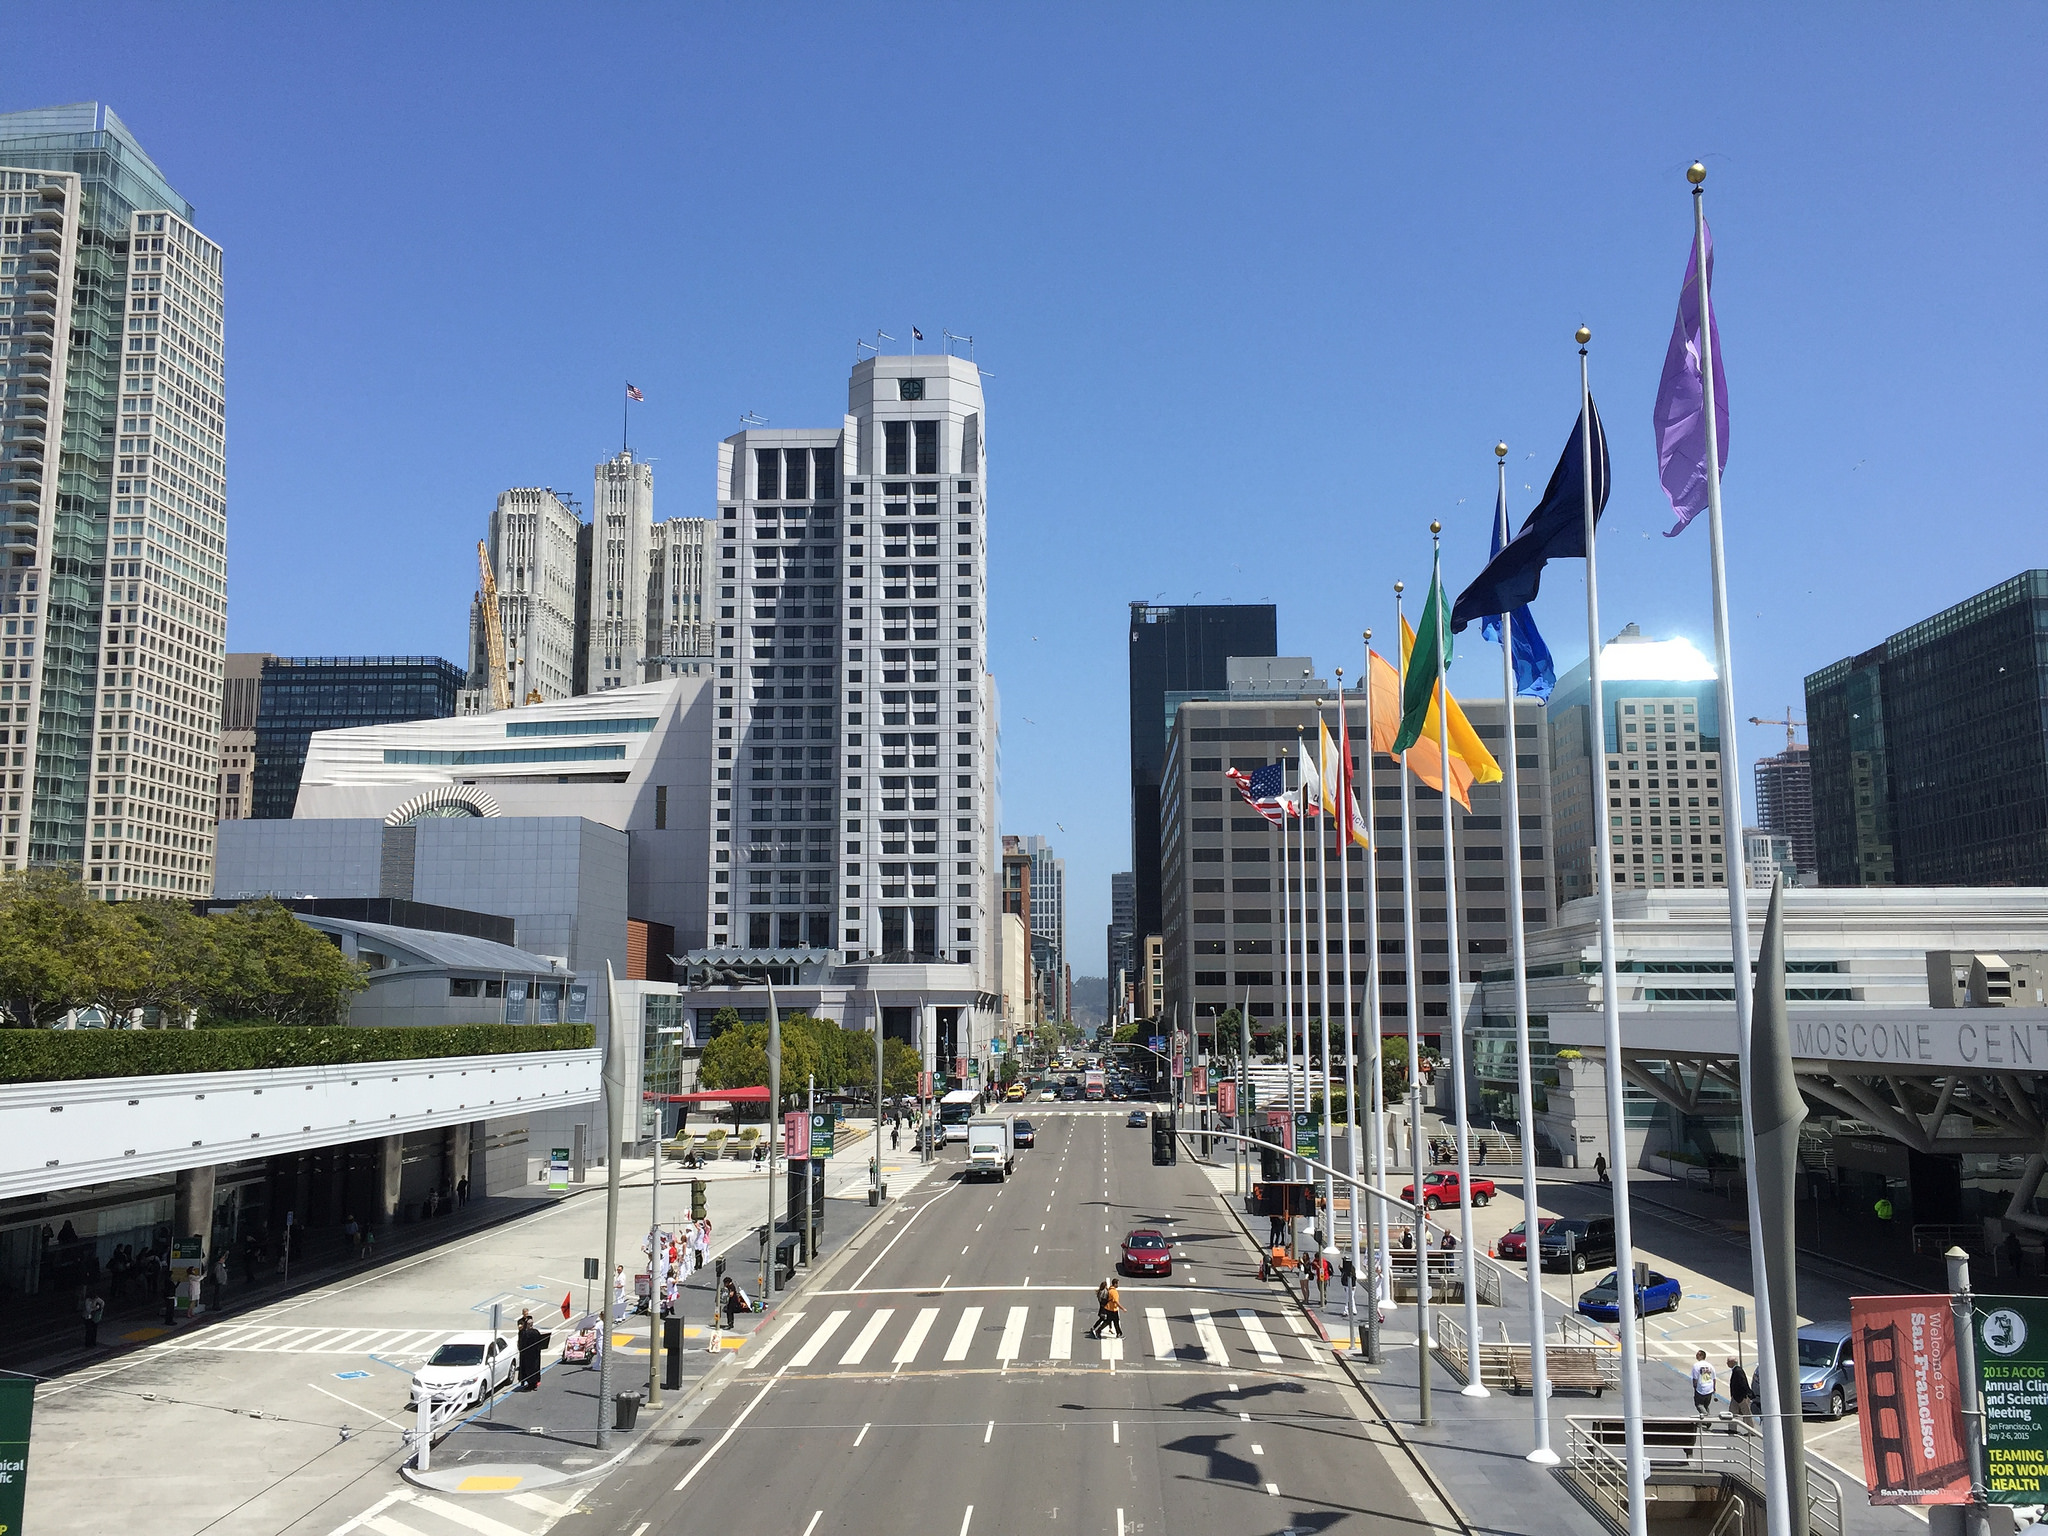 Wide city street stretches out below with low pale cement buildings on either side, a row of tall, brightly colored flags on the right and tall skyscrapers in the backround.